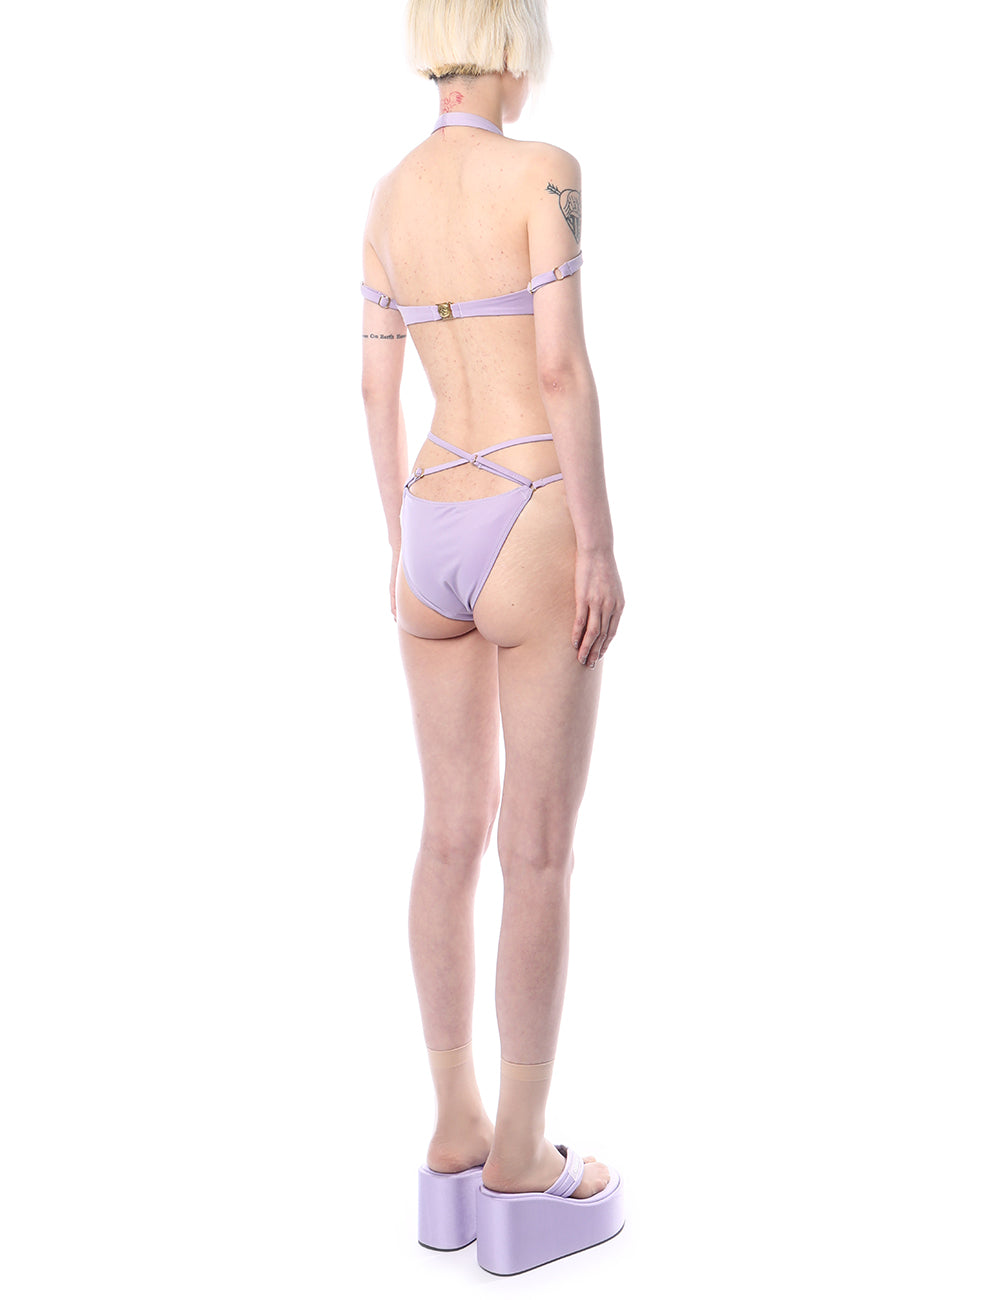 RoomSERVICE x Shyness exclusive Lilac Bat Swimsuit